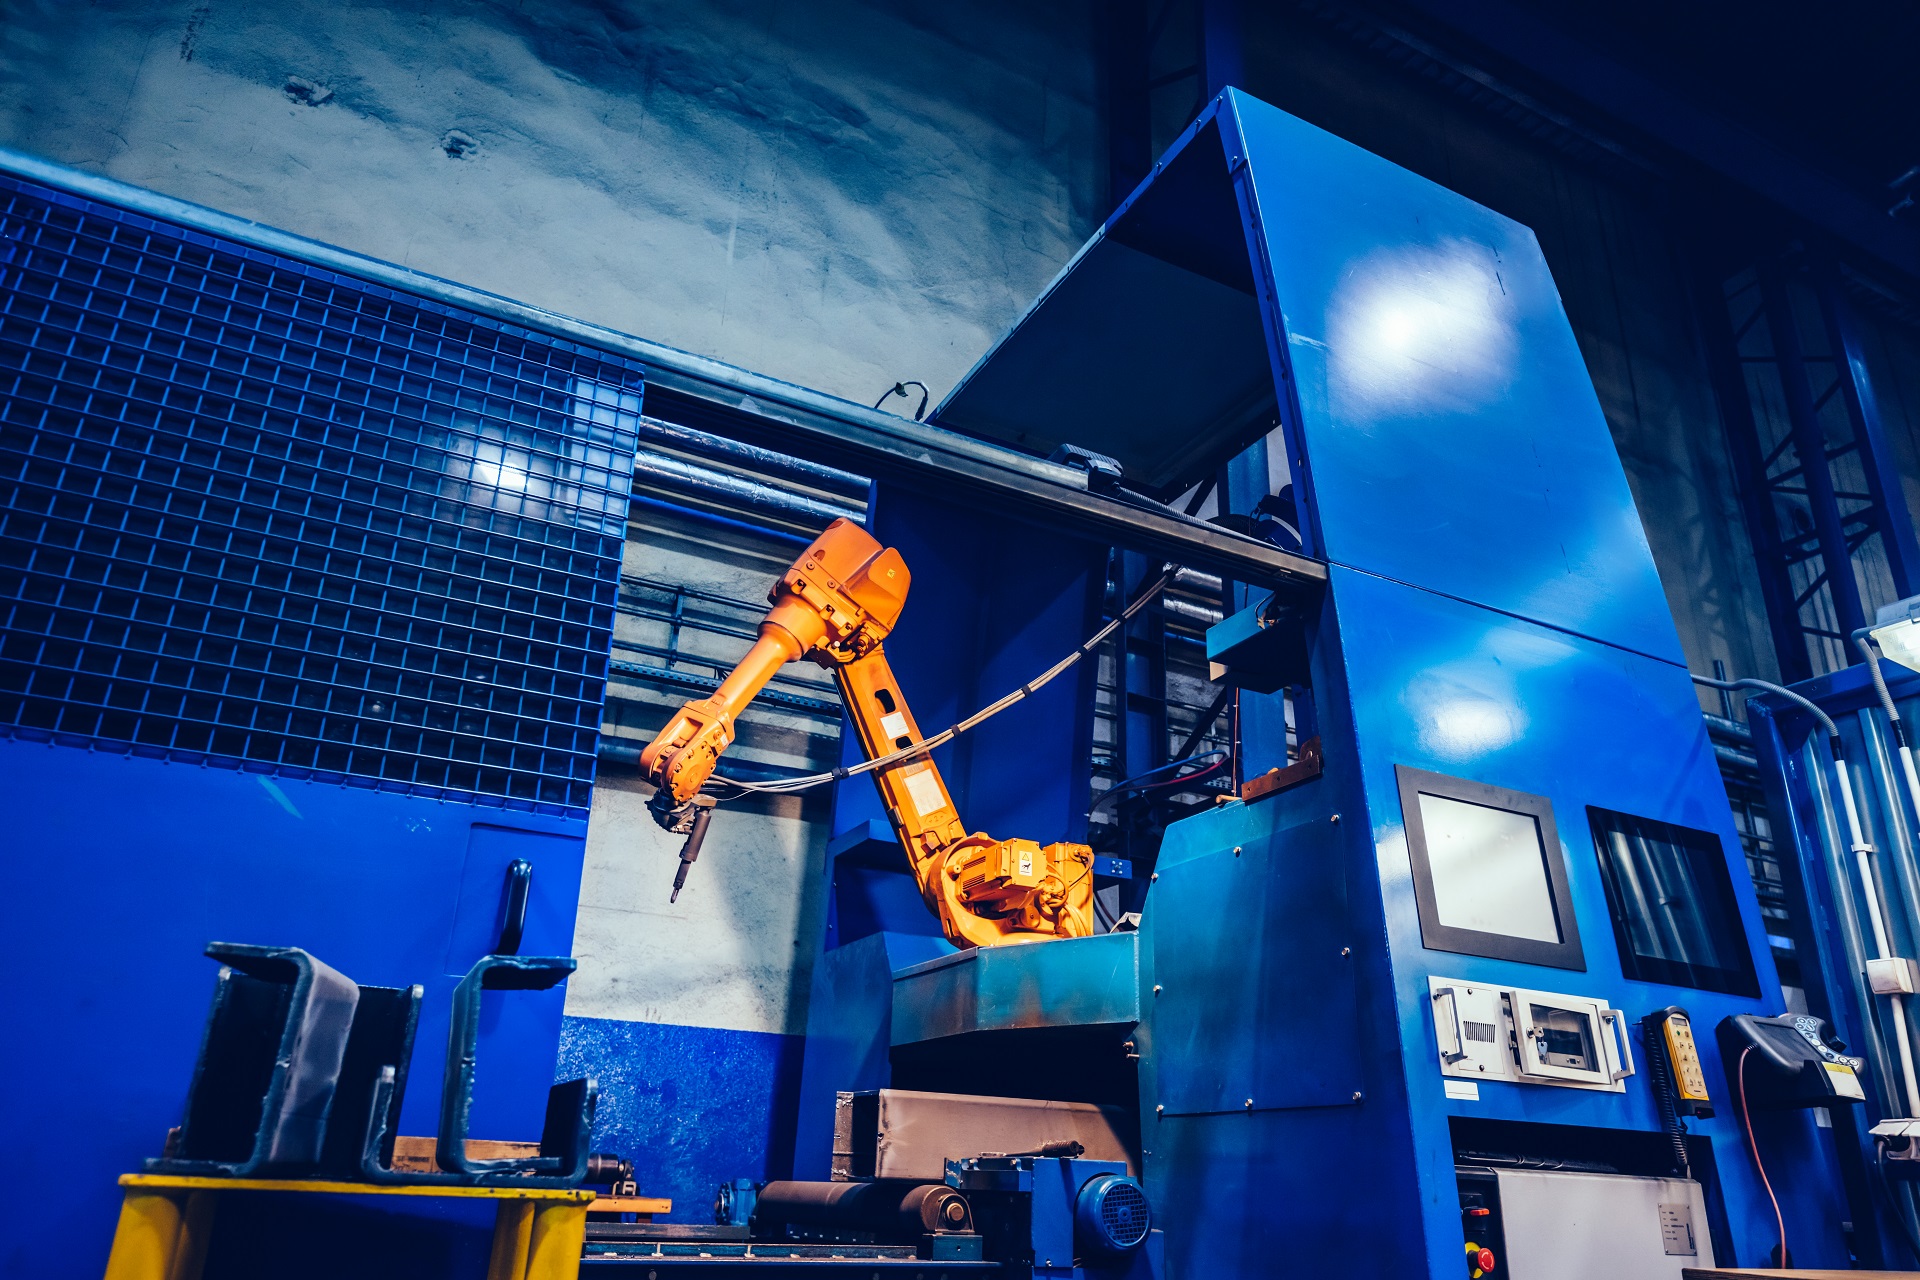 Manufacturing in Industry 4.0: Digitizing Manufacturing with “Fox ERP for Manufacturing”